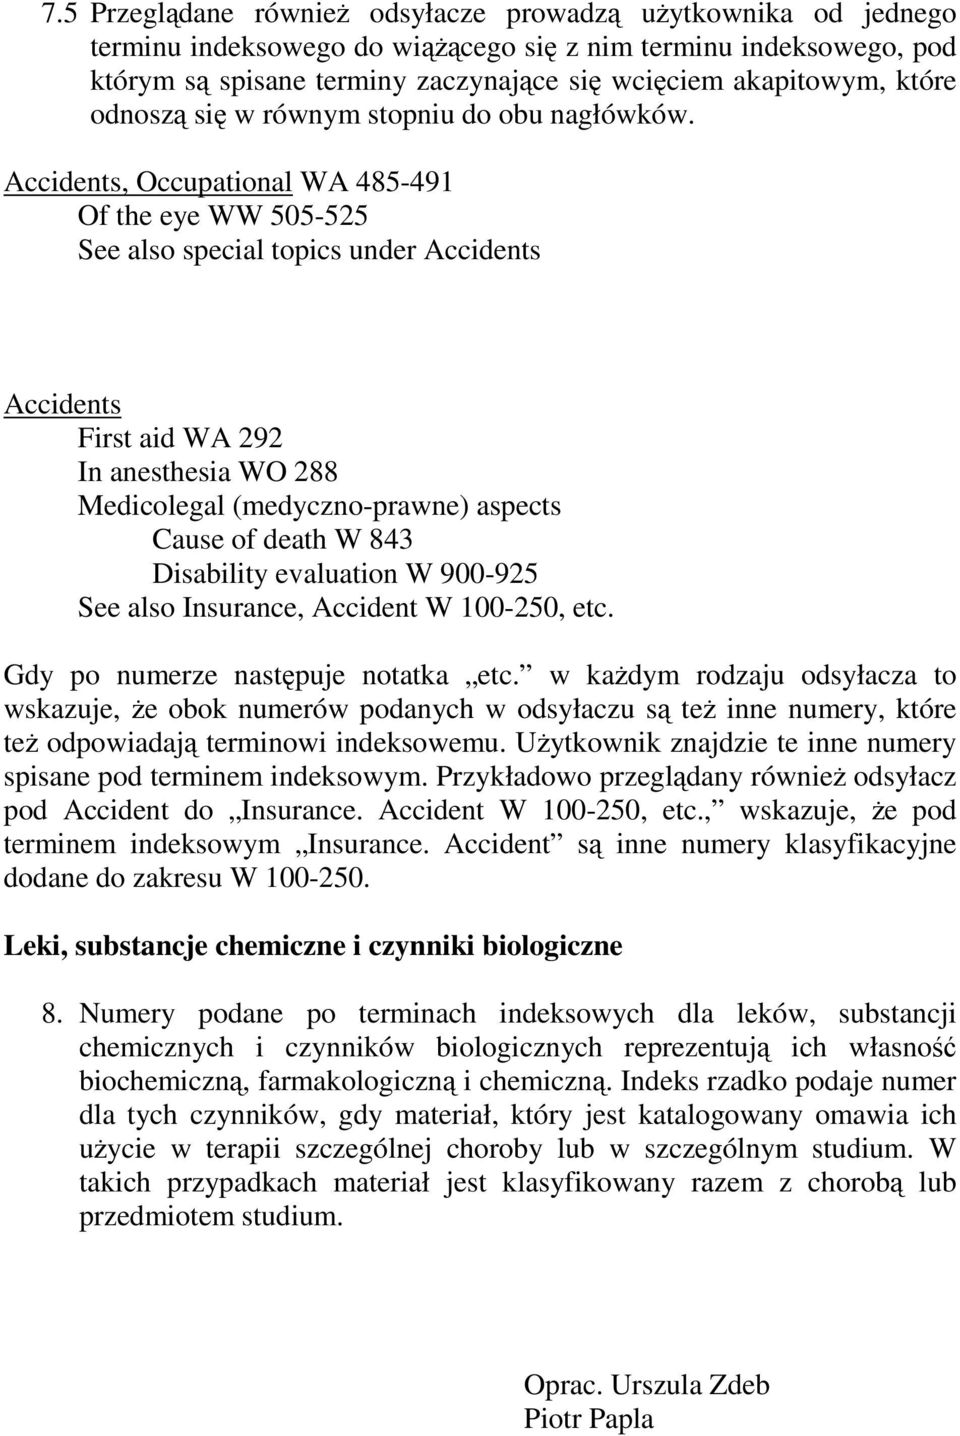 Accidents, Occupational WA 485-491 Of the eye WW 505-525 See also special topics under Accidents Accidents First aid WA 292 In anesthesia WO 288 Medicolegal (medyczno-prawne) aspects Cause of death W